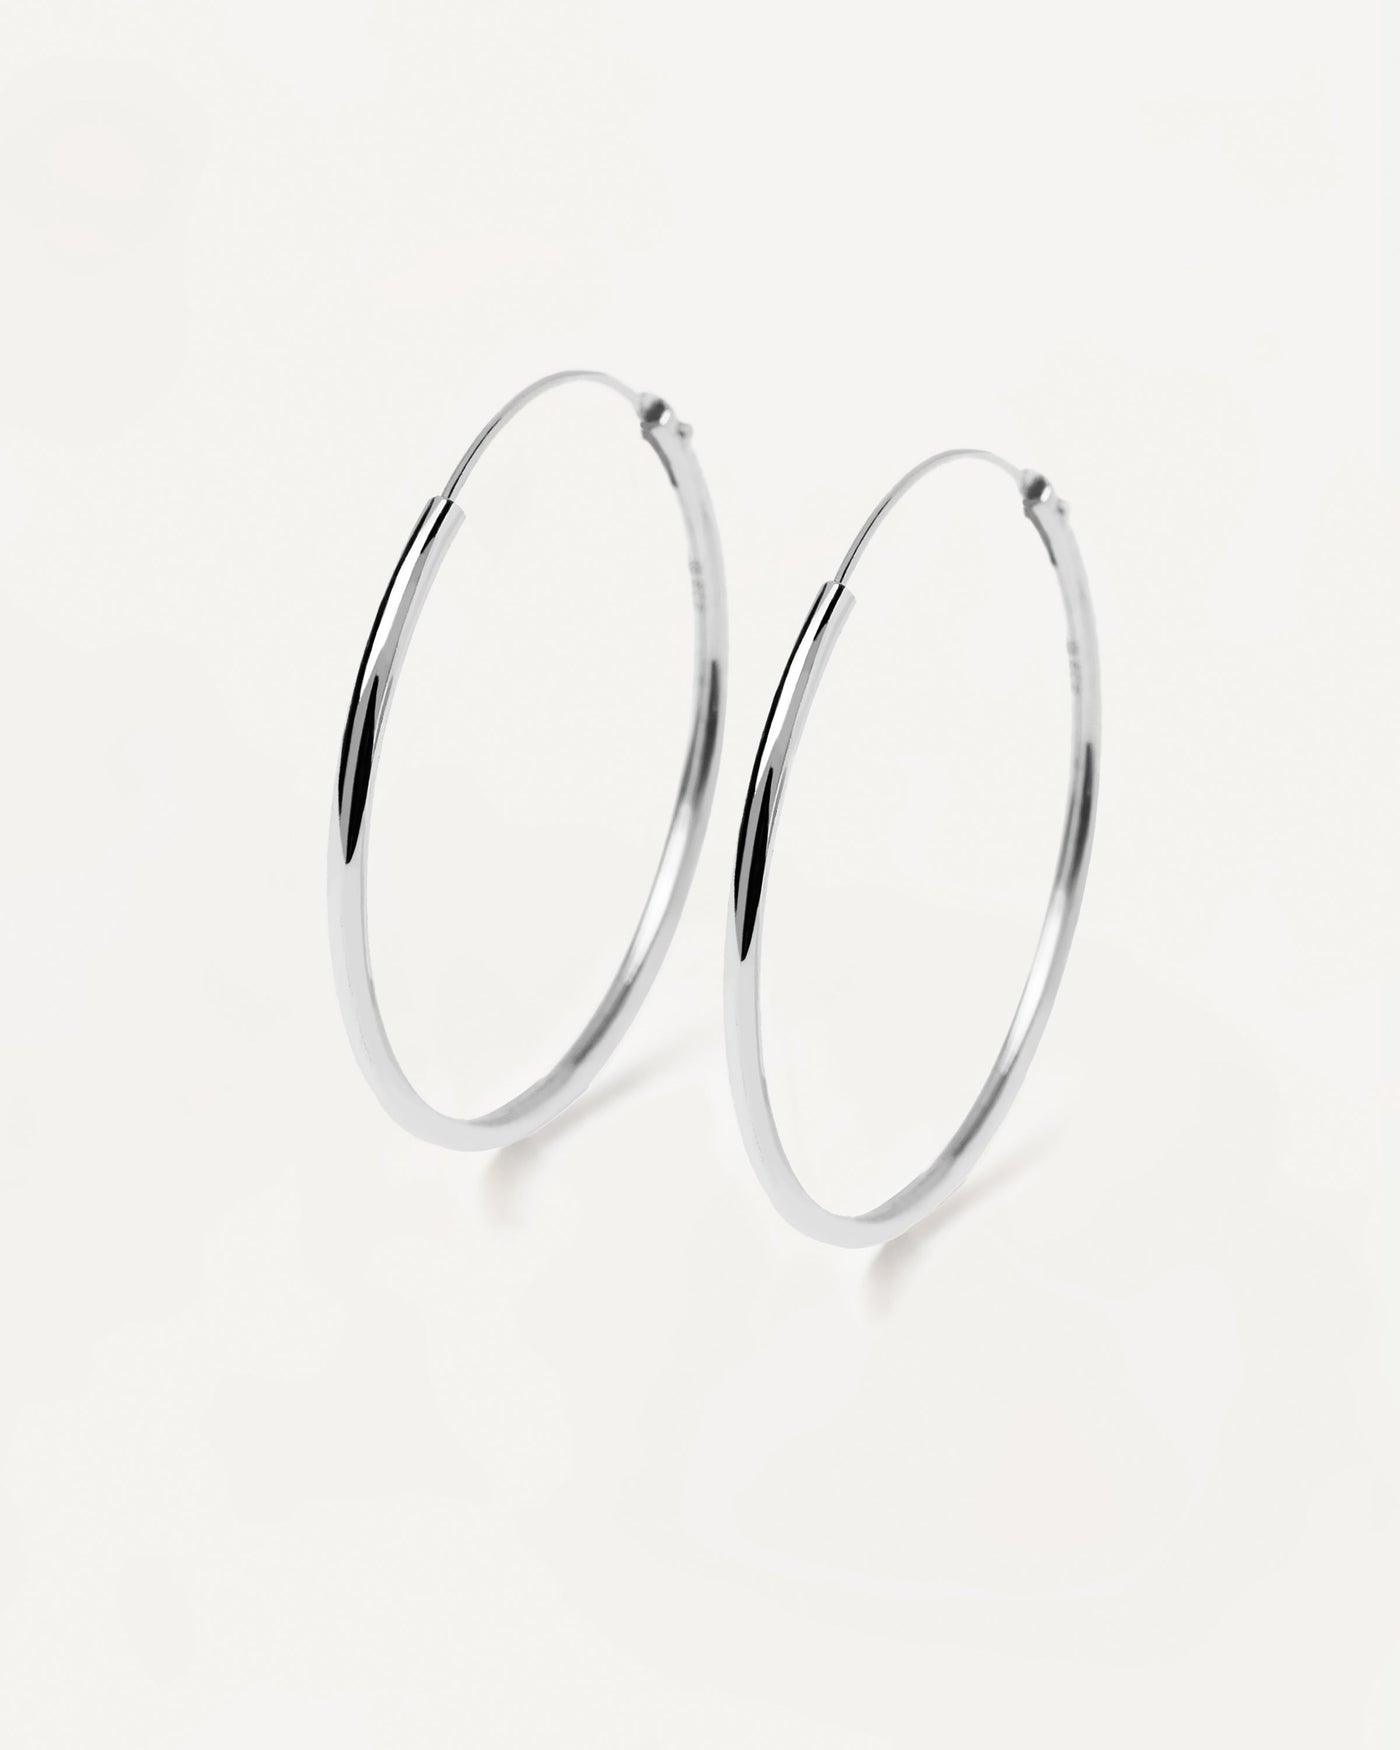 2023 Selection | Large Hoops Silver. Classic round endless hoop earrings in 925 sterling silver. Get the latest arrival from PDPAOLA. Place your order safely and get this Best Seller. Free Shipping.